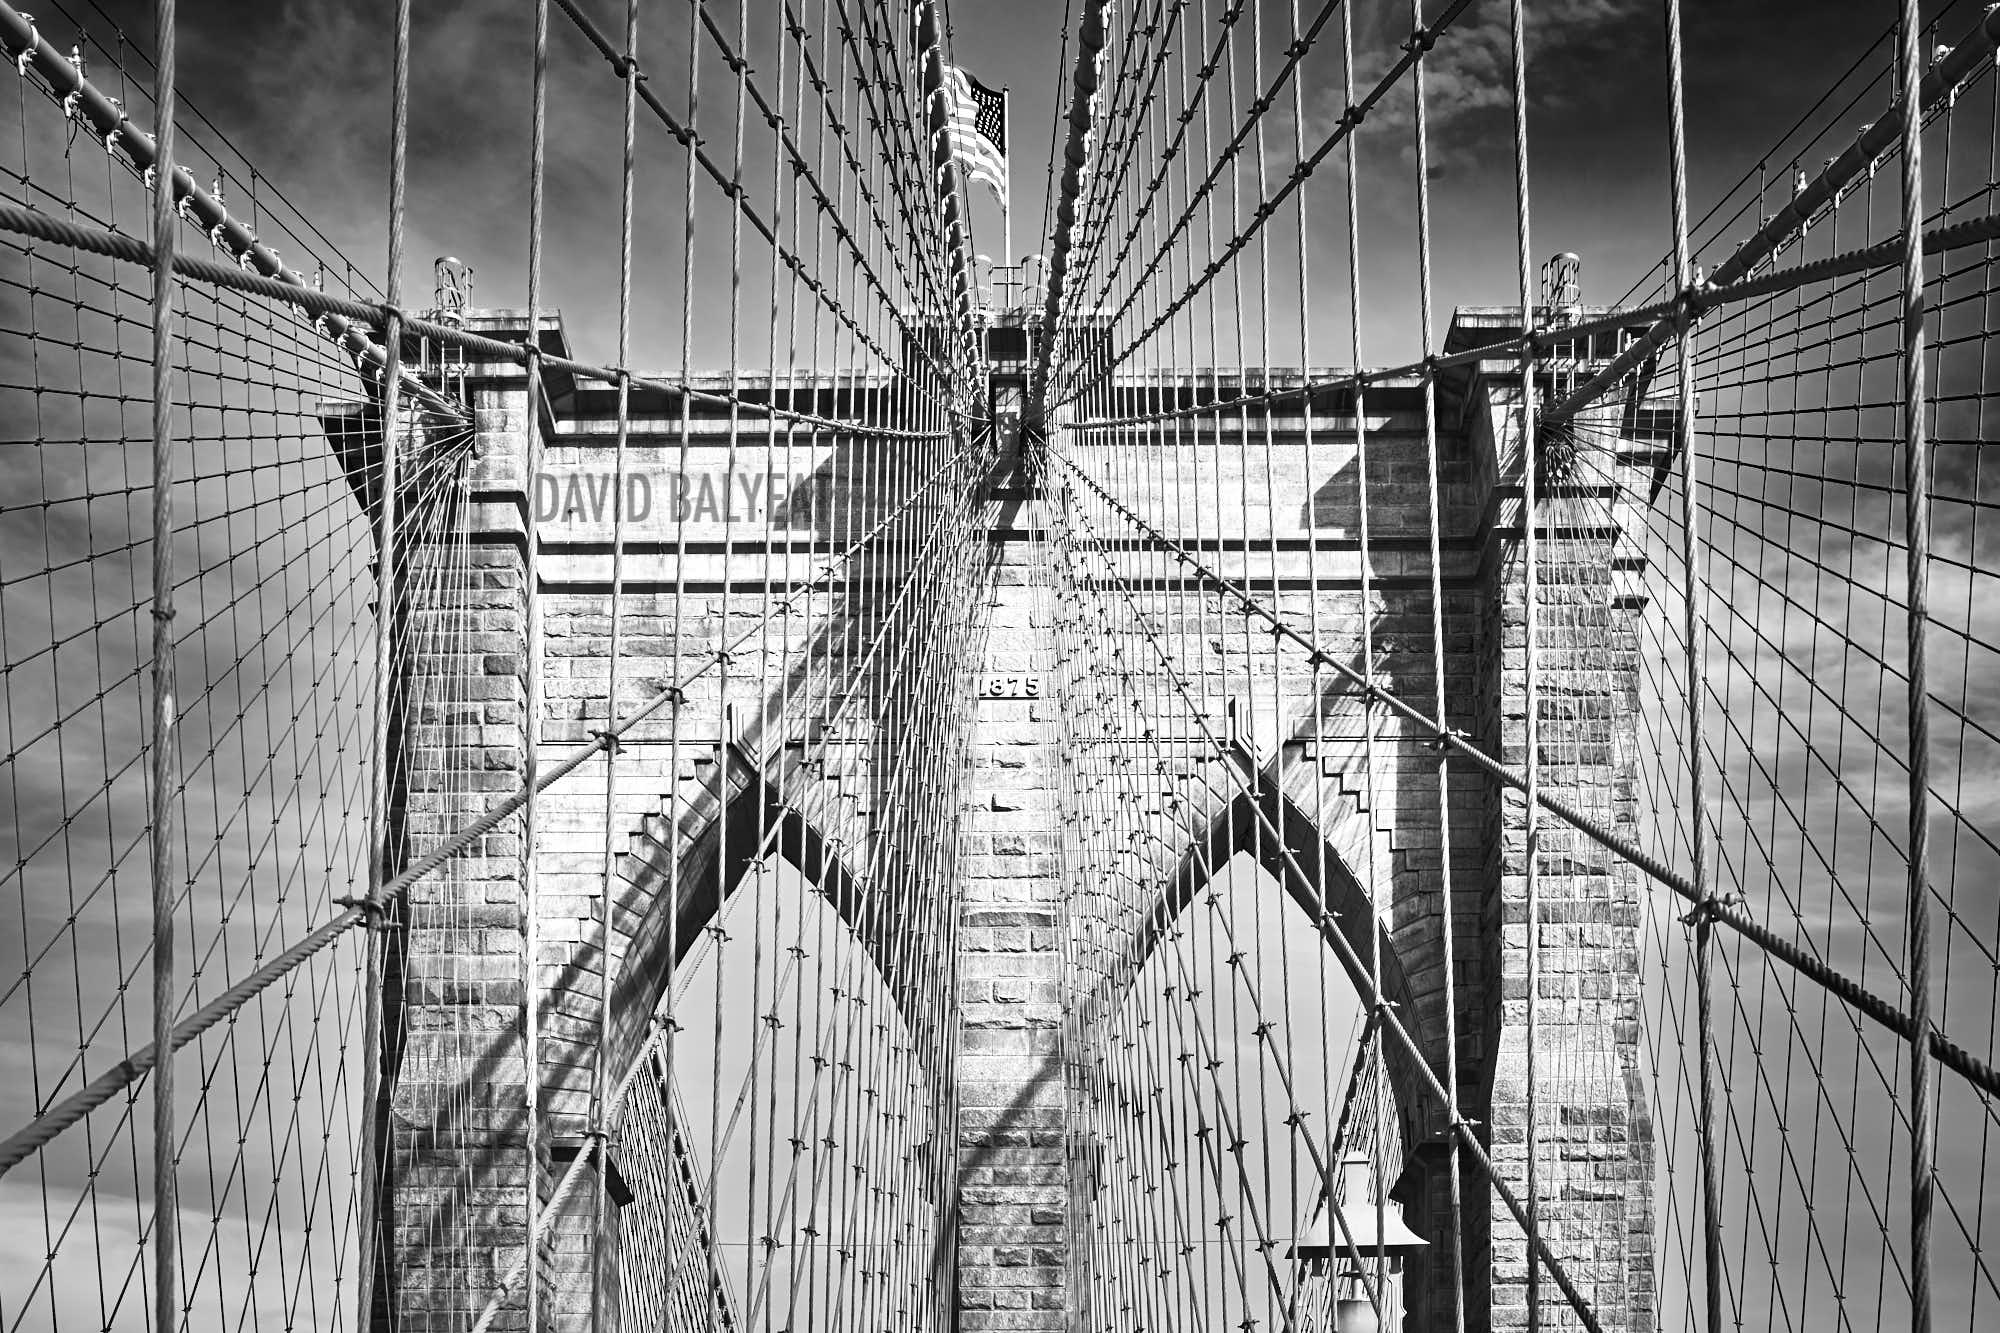 Brooklyn Bridge New York City black and white high-definition HD professional landscape photography